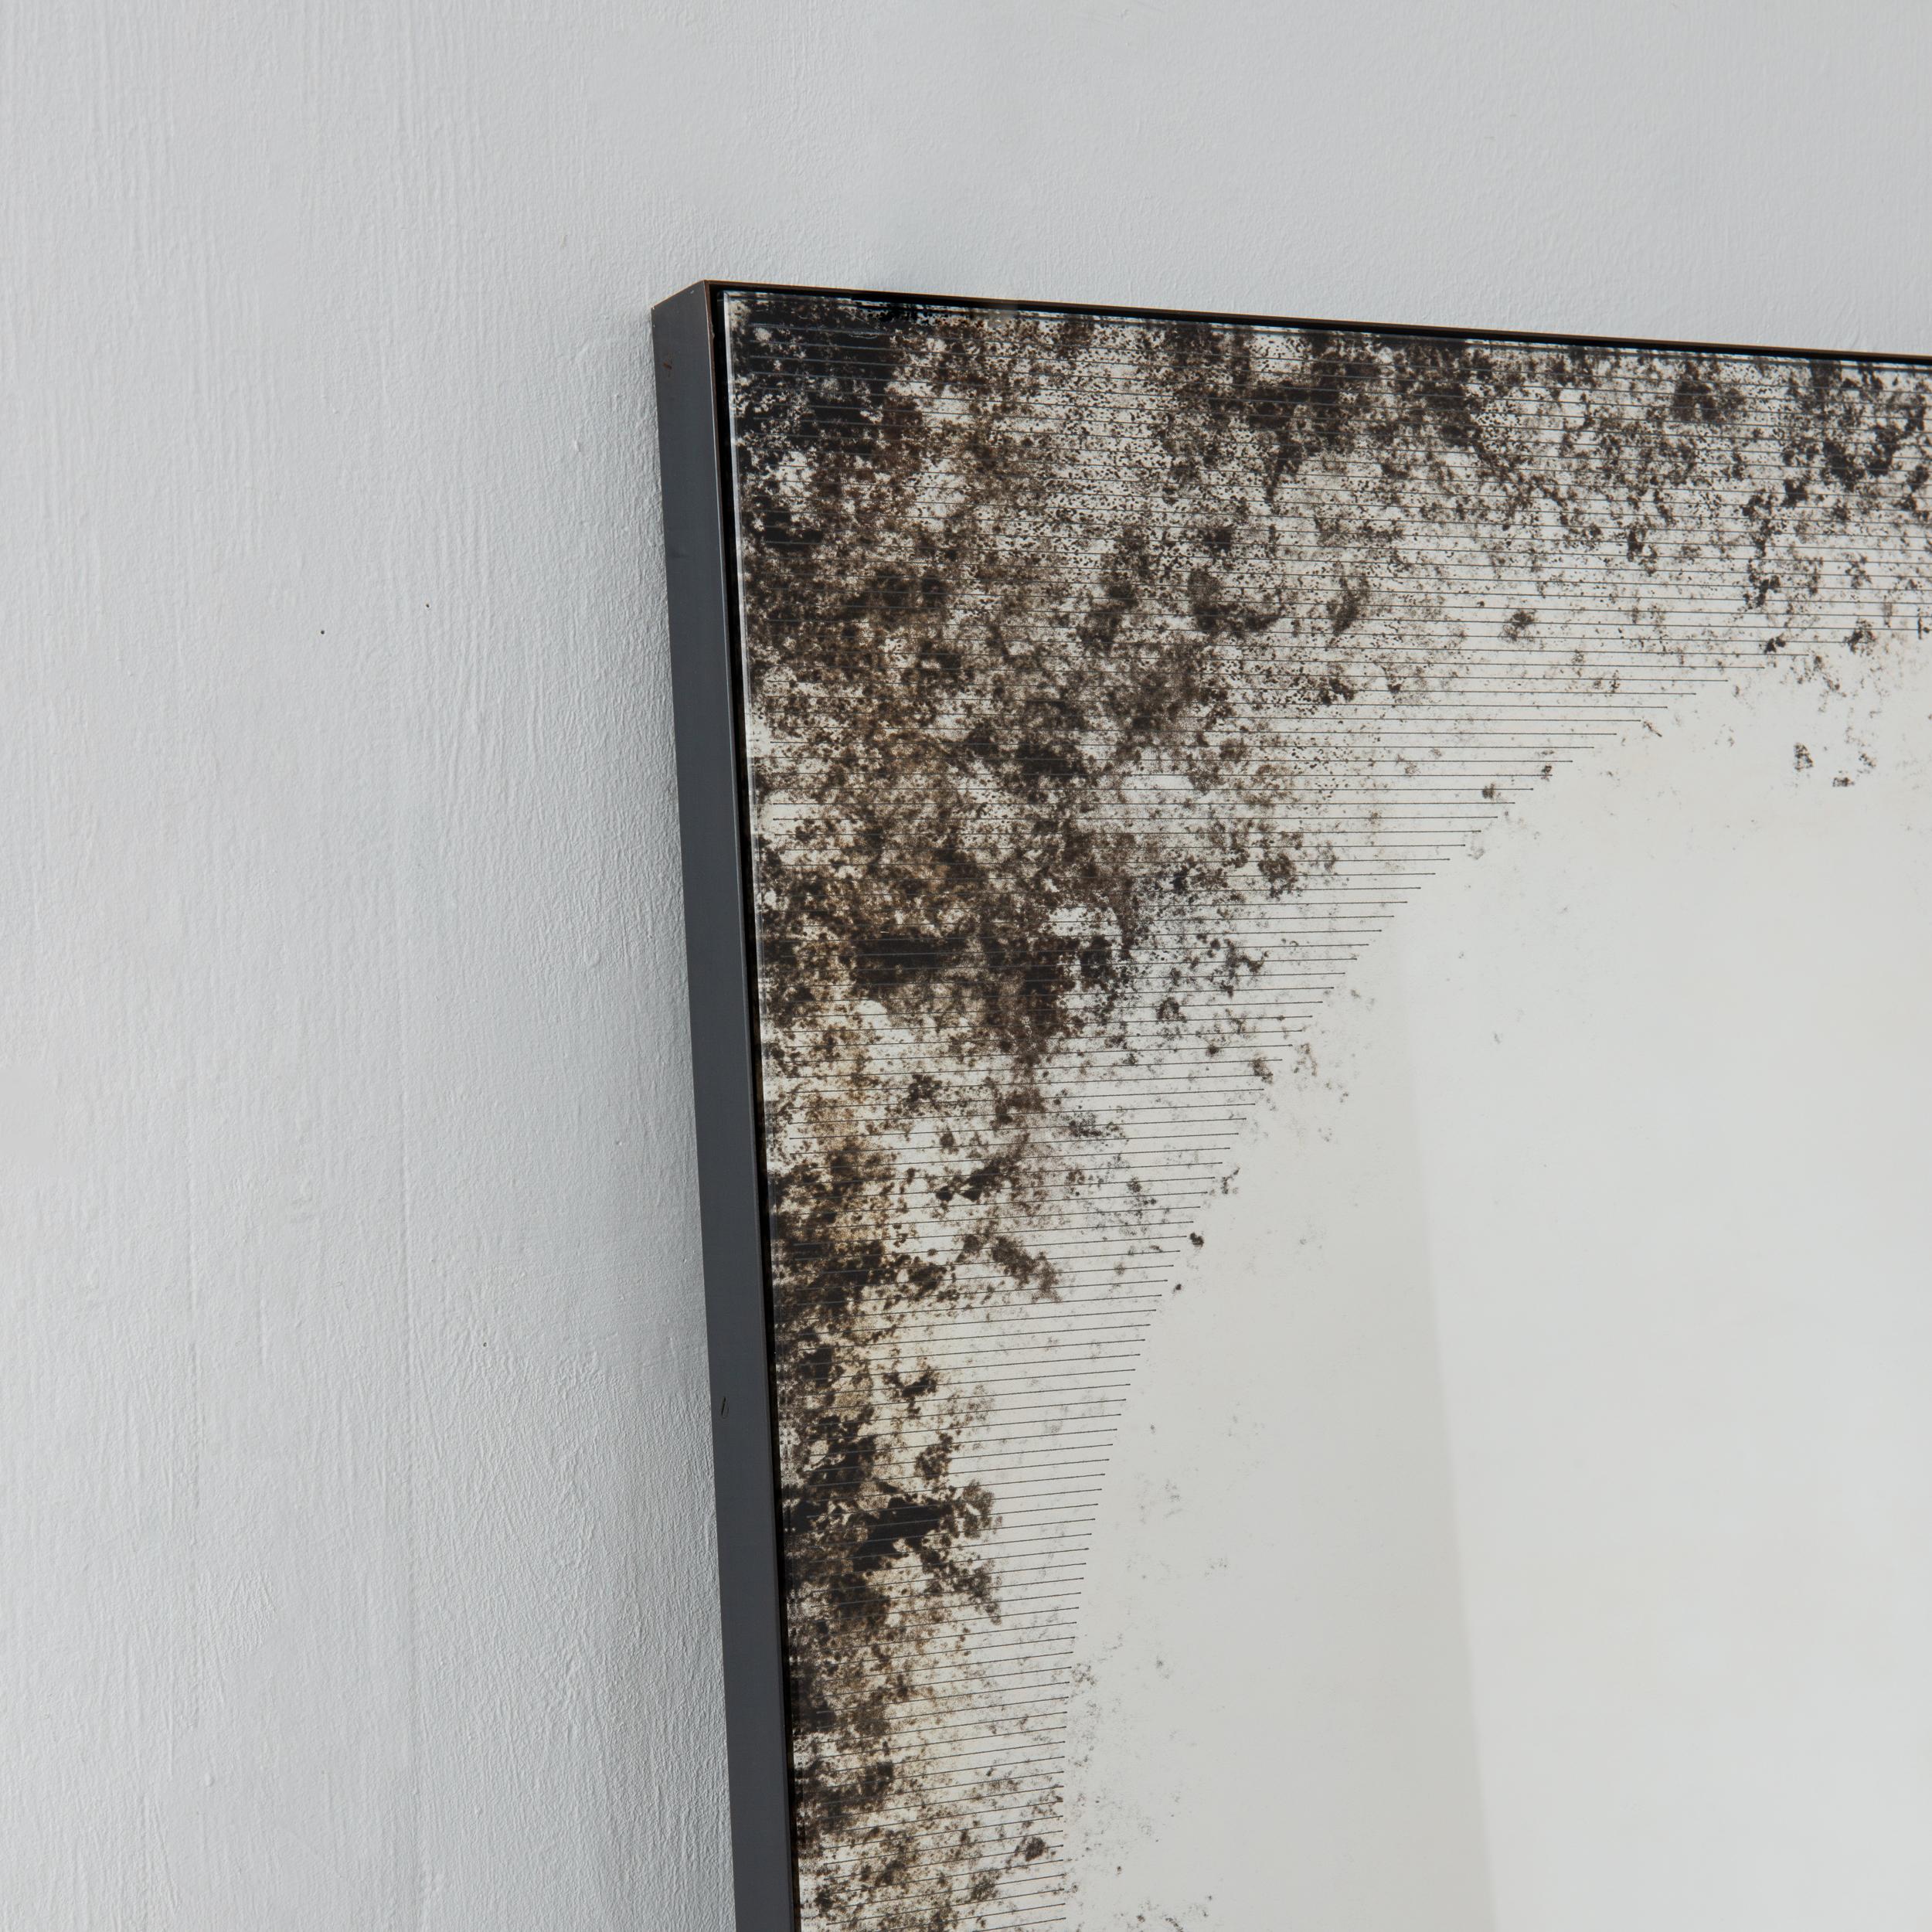 British Etched and Antiqued Horizon Mirror with Back Illumination, Blackened Metal Frame